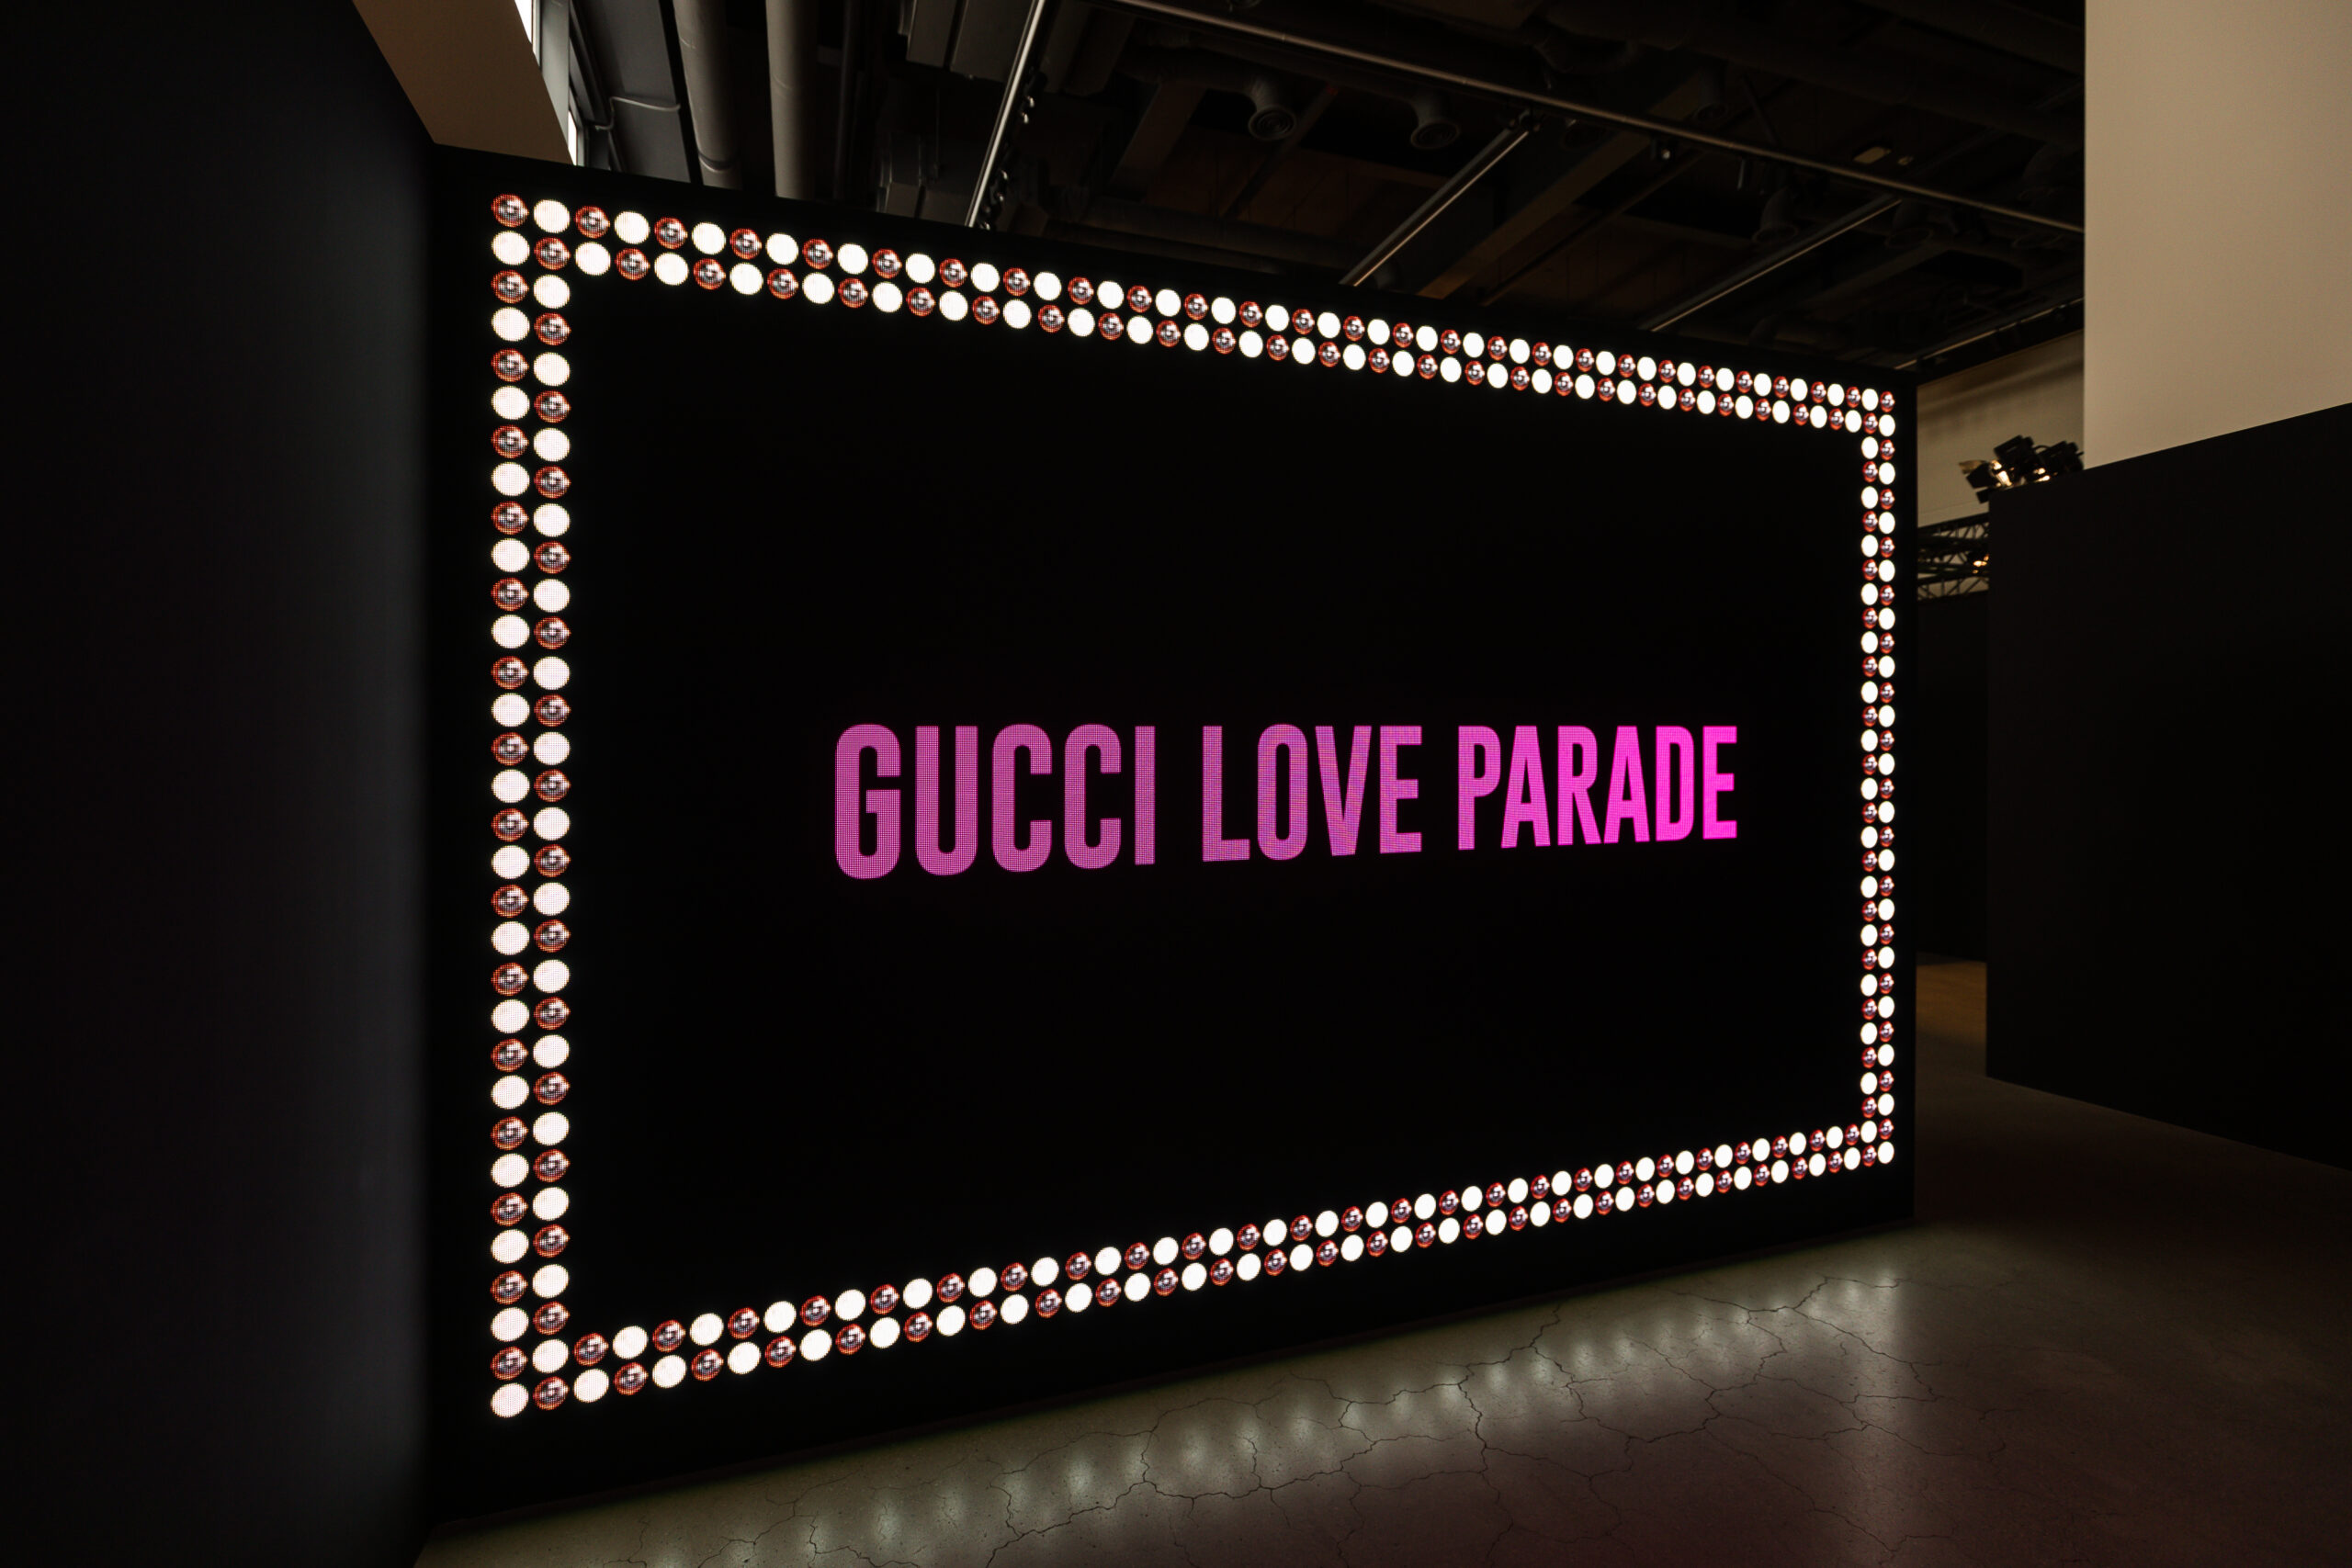 Discover the world of Gucci today at the Gucci Podium in